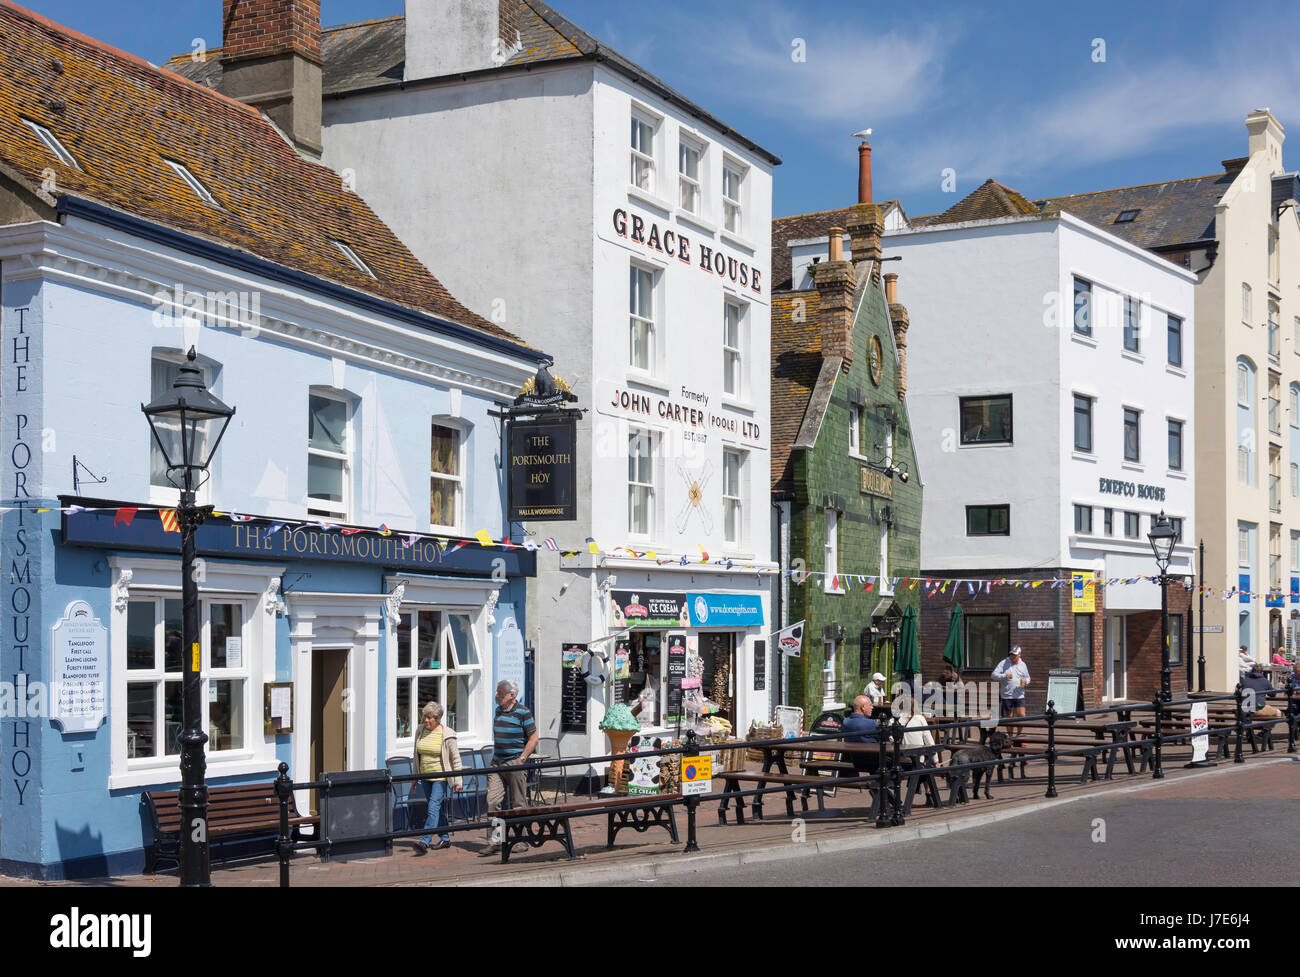 The Portsmouth Hoy and Poole Arms Pubs on seafront, Town Quay, Poole, Dorset, England, United Kingdom Stock Photo